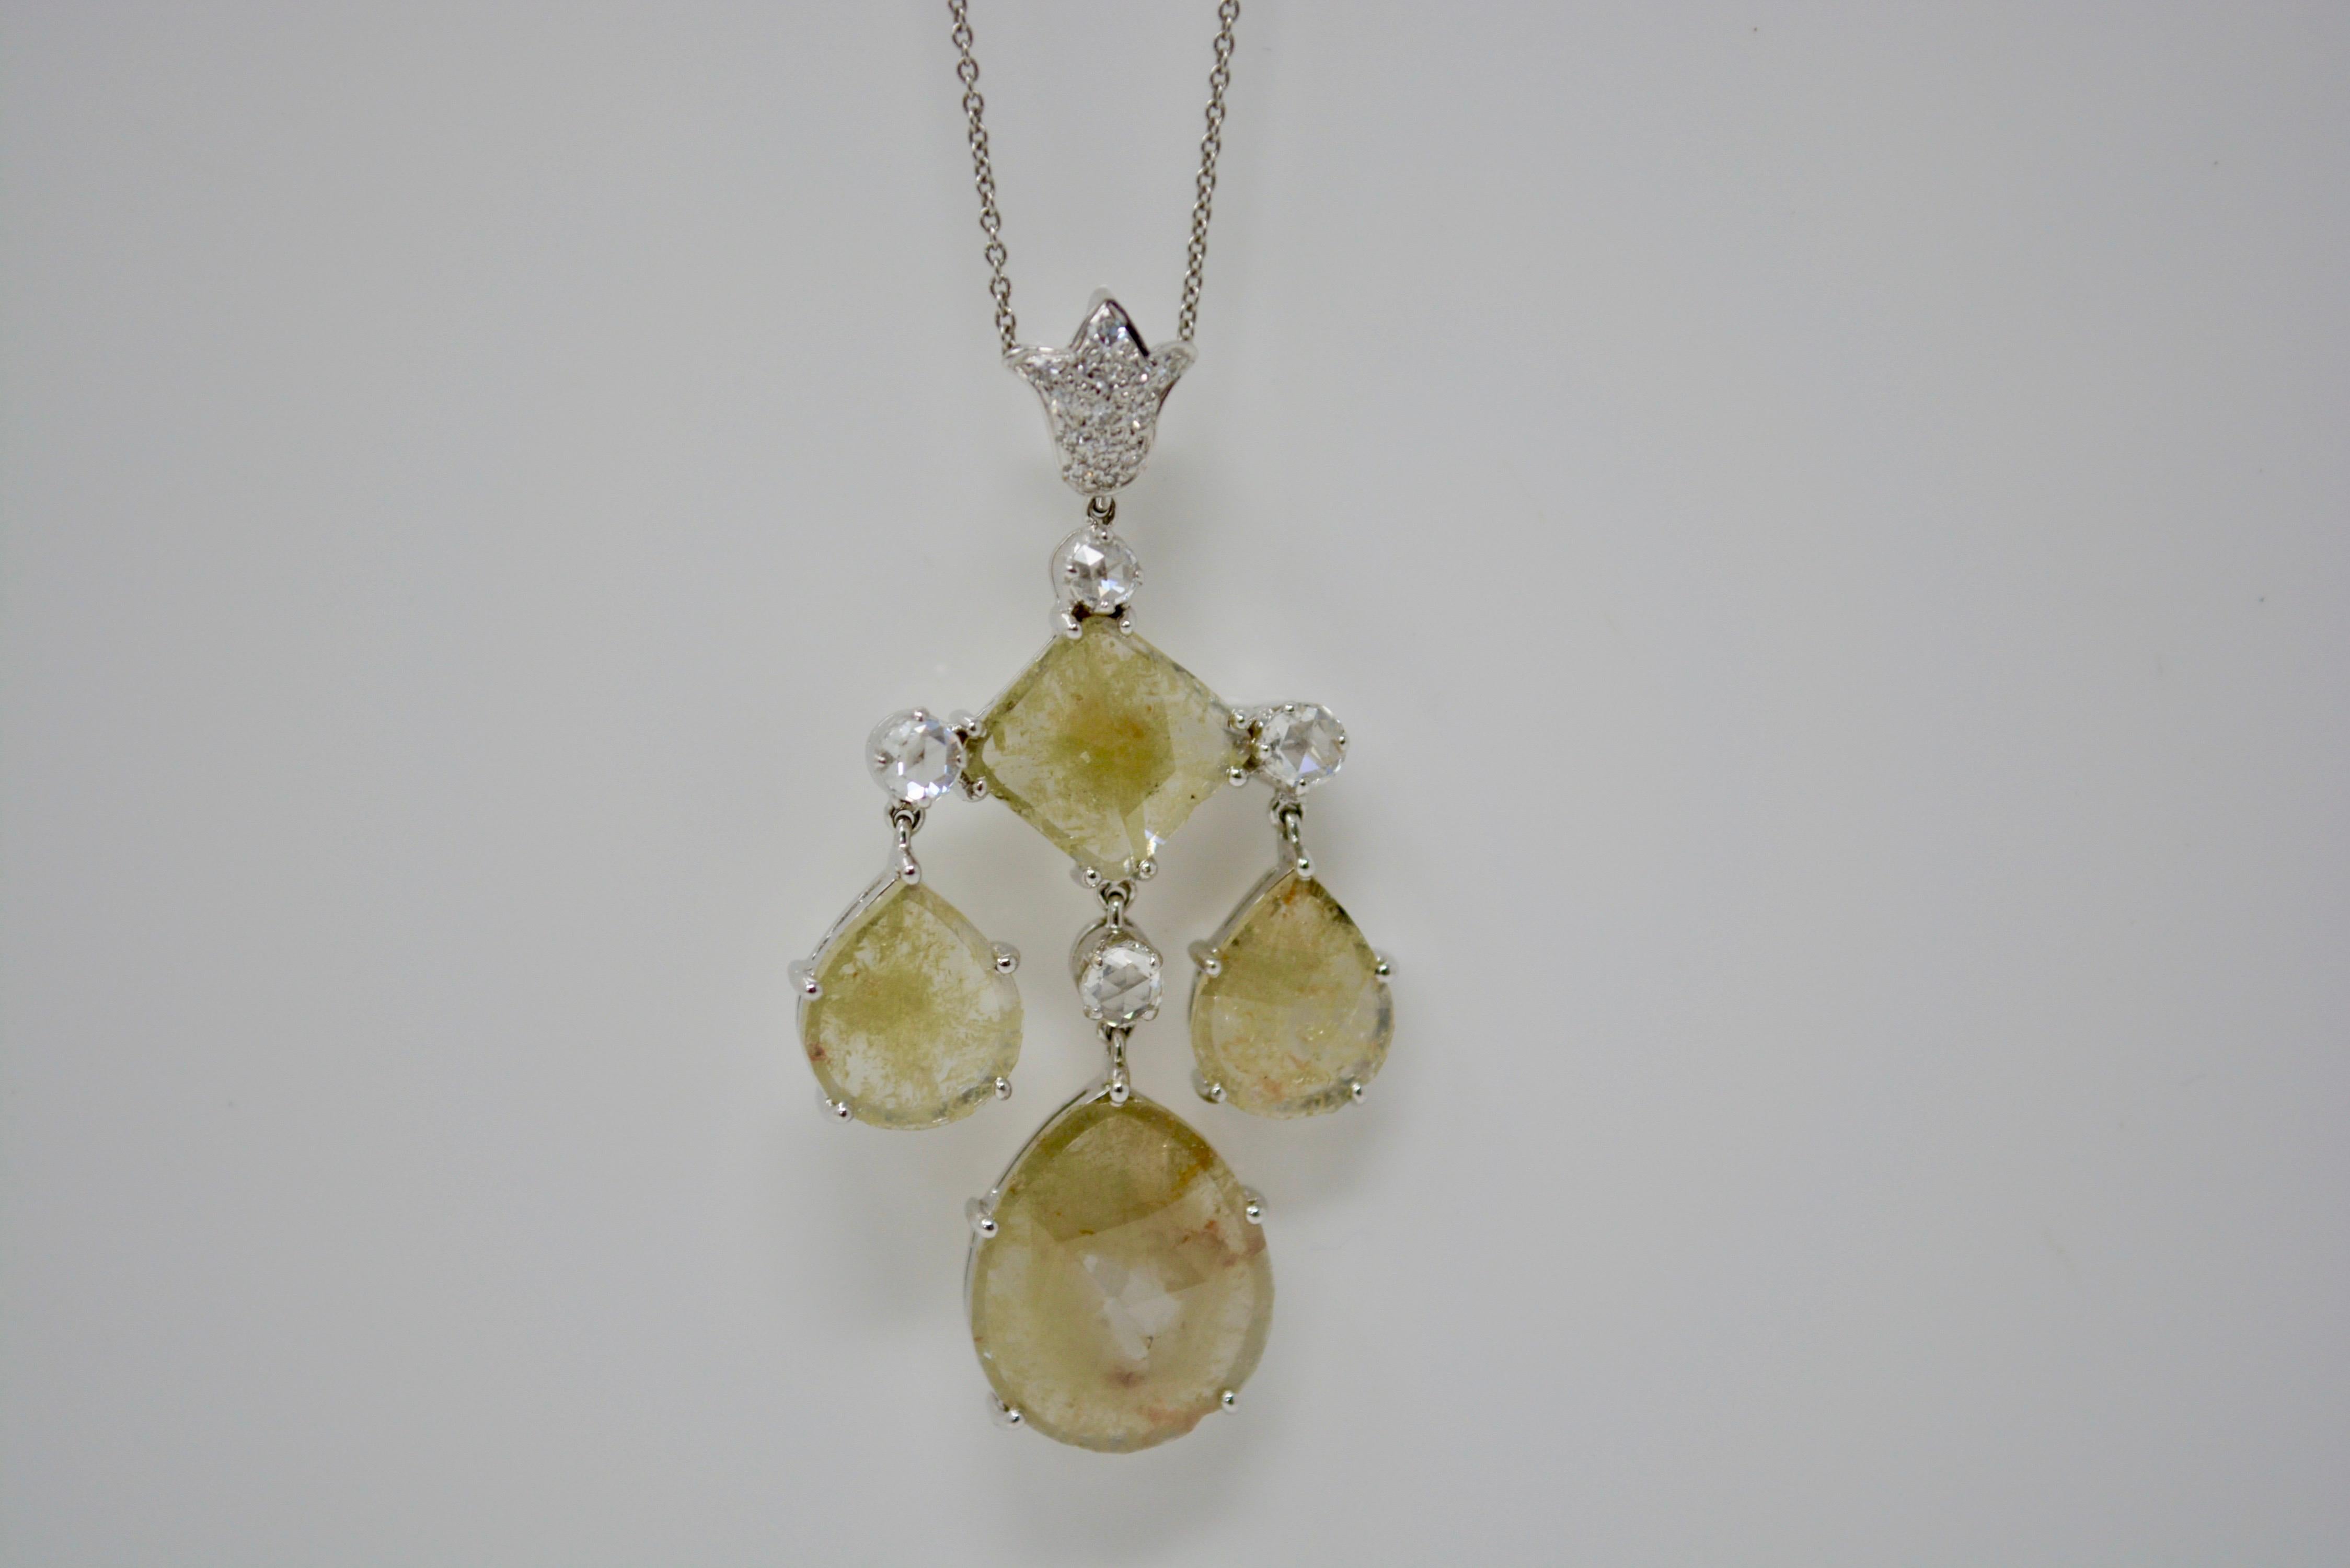 This beautiful necklace features 5.72 carat of natural yellow diamonds cut in slices for big look, light weight , brightness and shine. This unique necklace also includes white small single cut diamonds weighing 0.08 carat and white rose cut